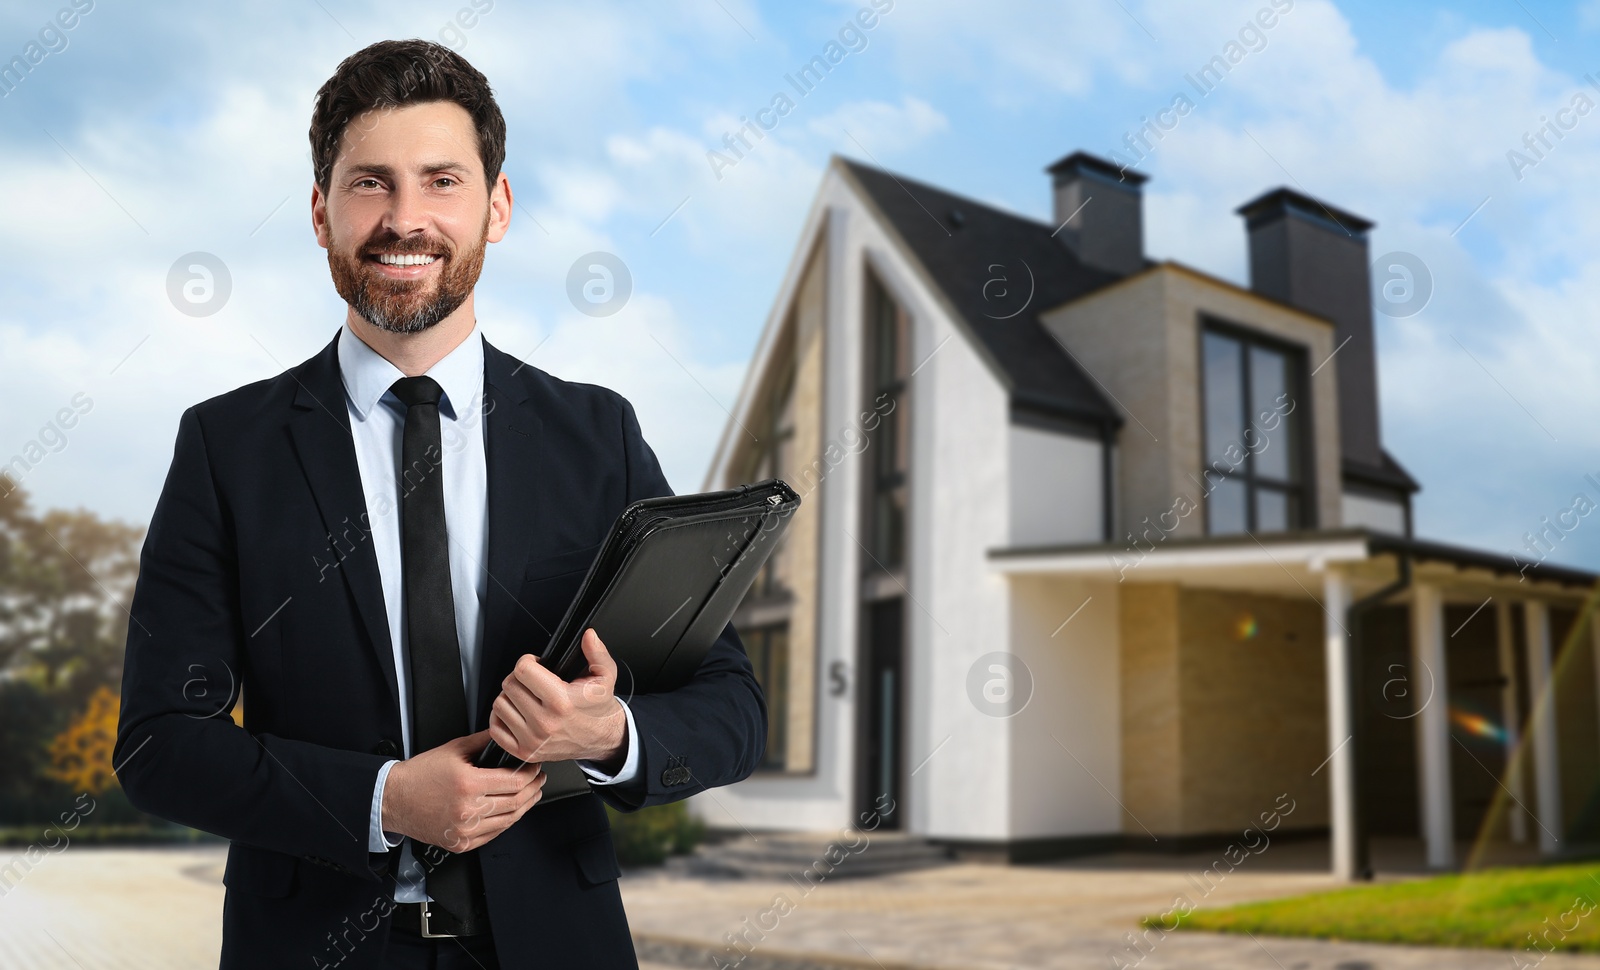 Image of Smiling real estate agent with portfolio near beautiful house outdoors. Space for text